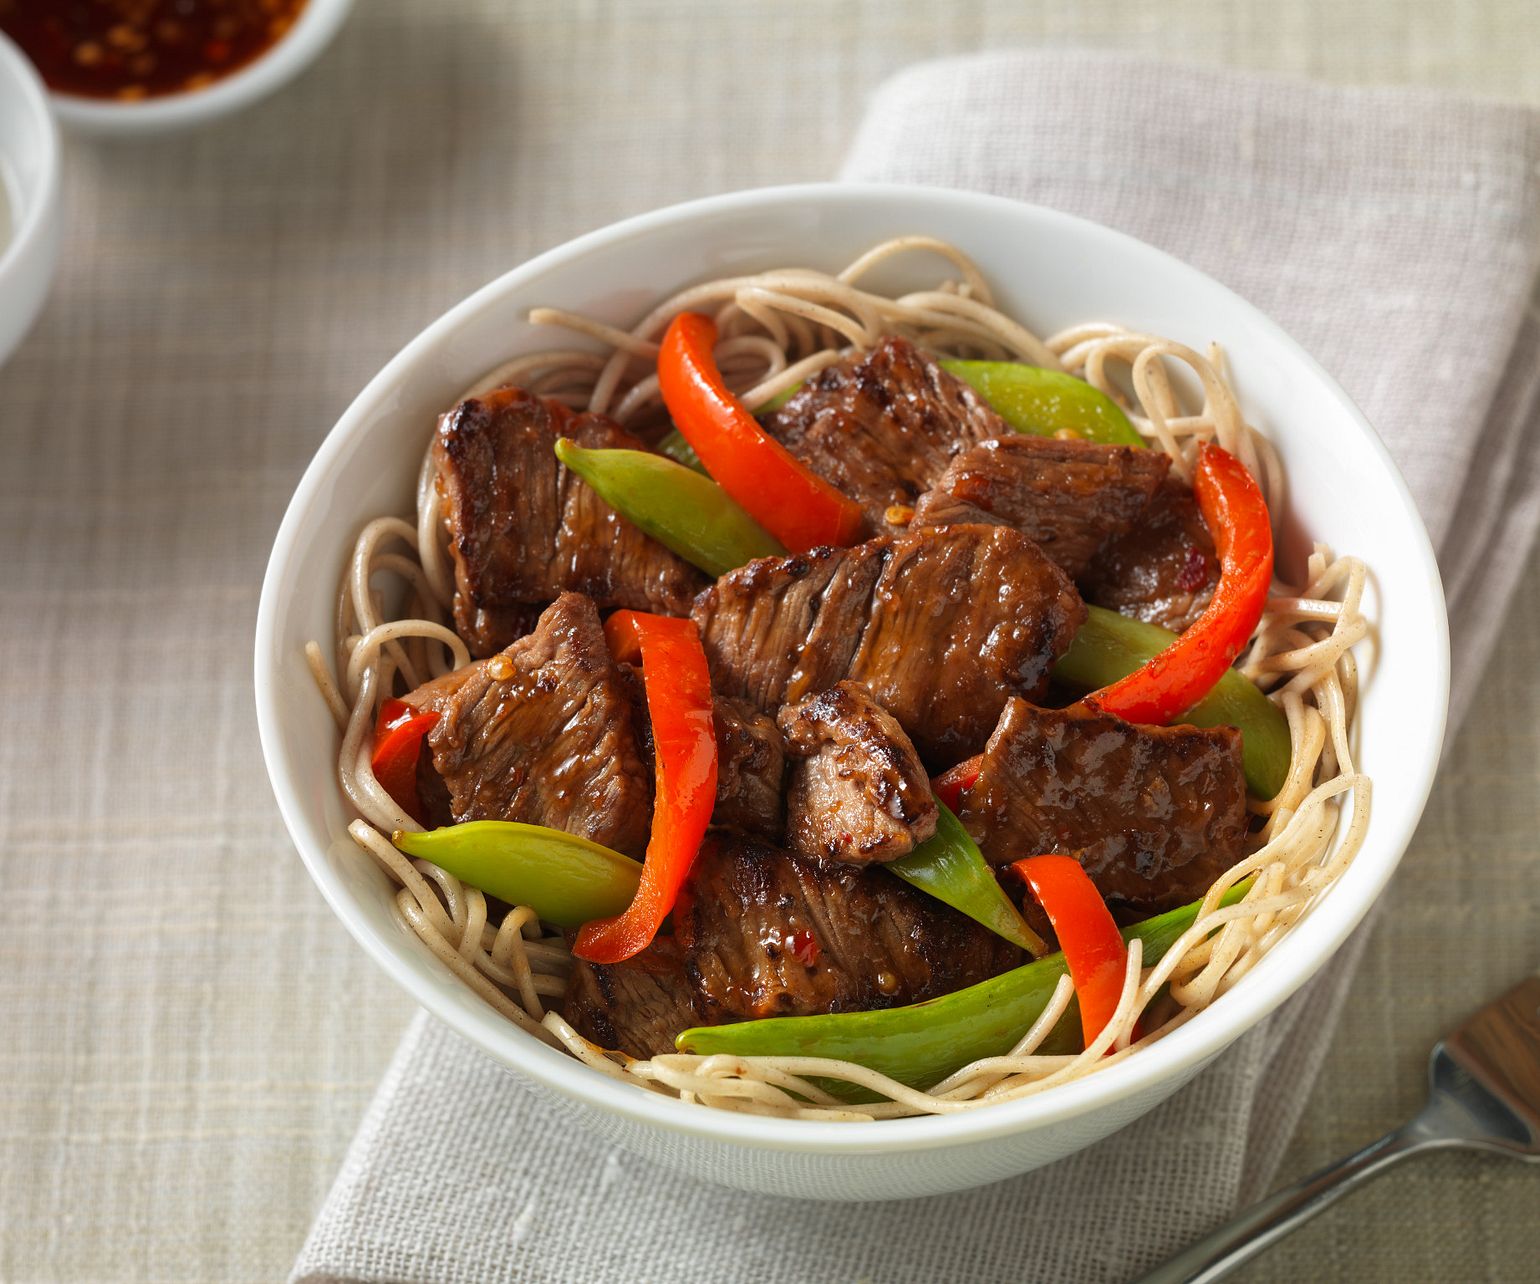 Tangy Beef Stir-Fry